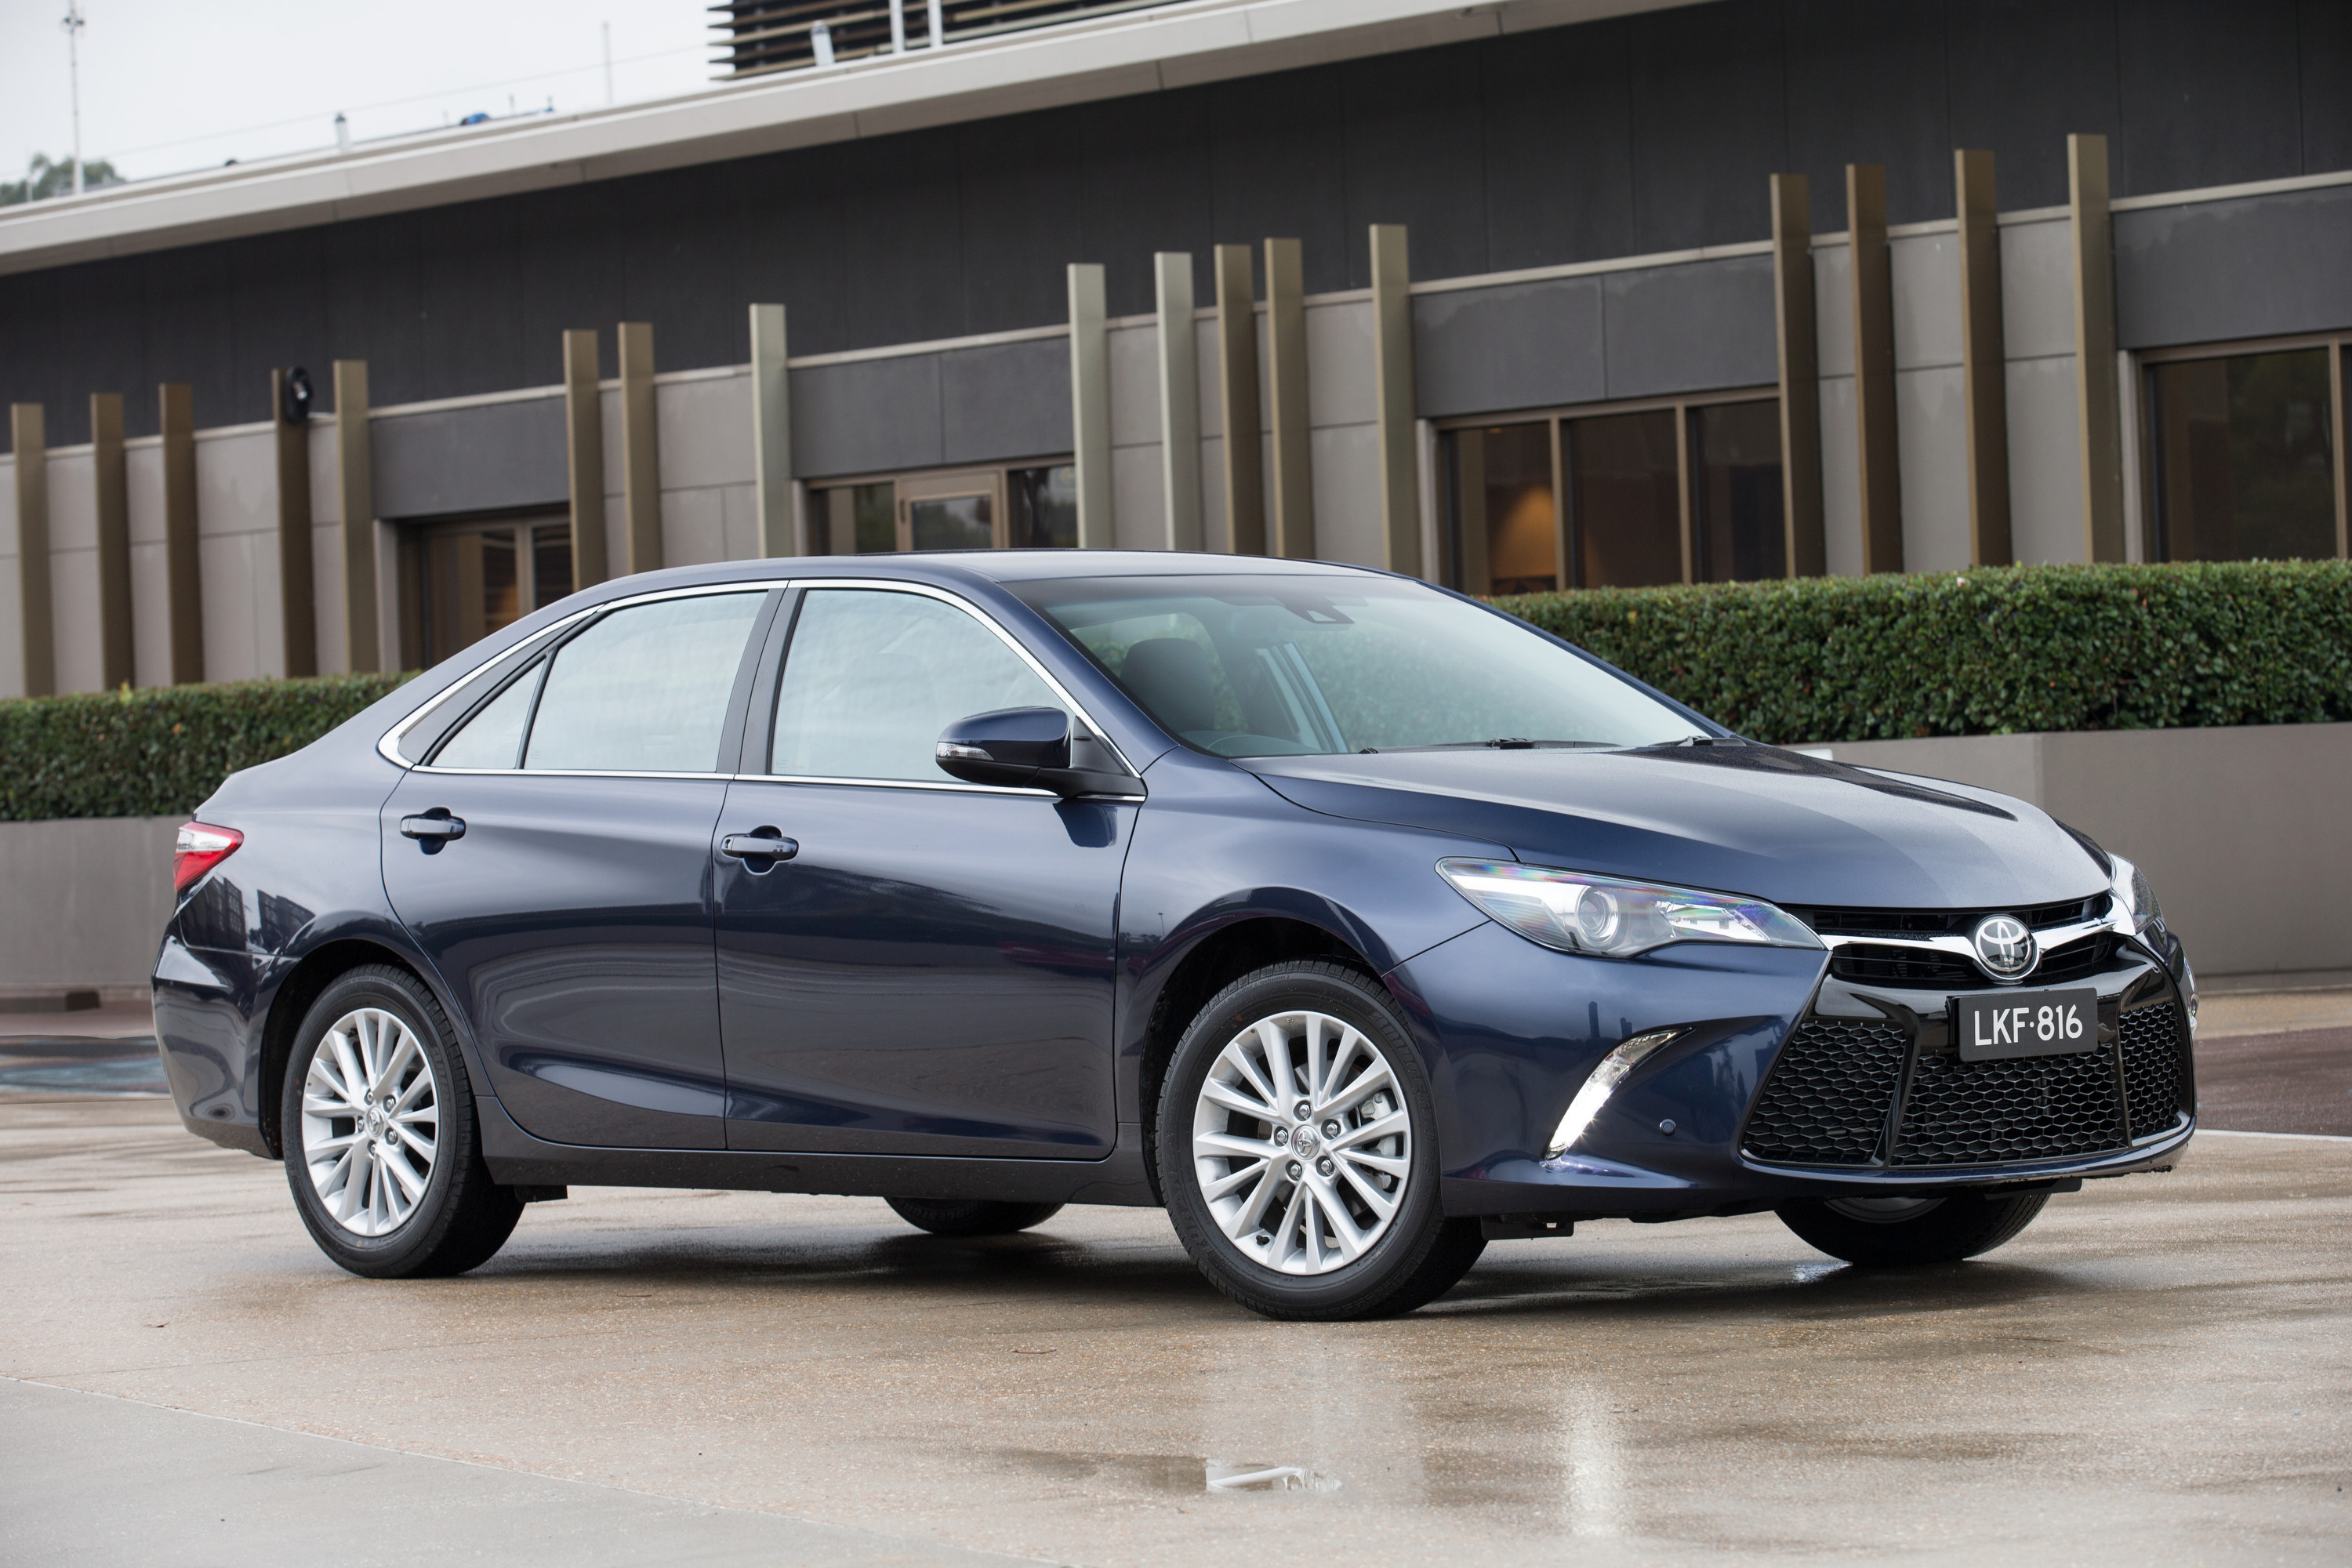 2016 Toyota Camry pricing and specifications - photos | CarAdvice